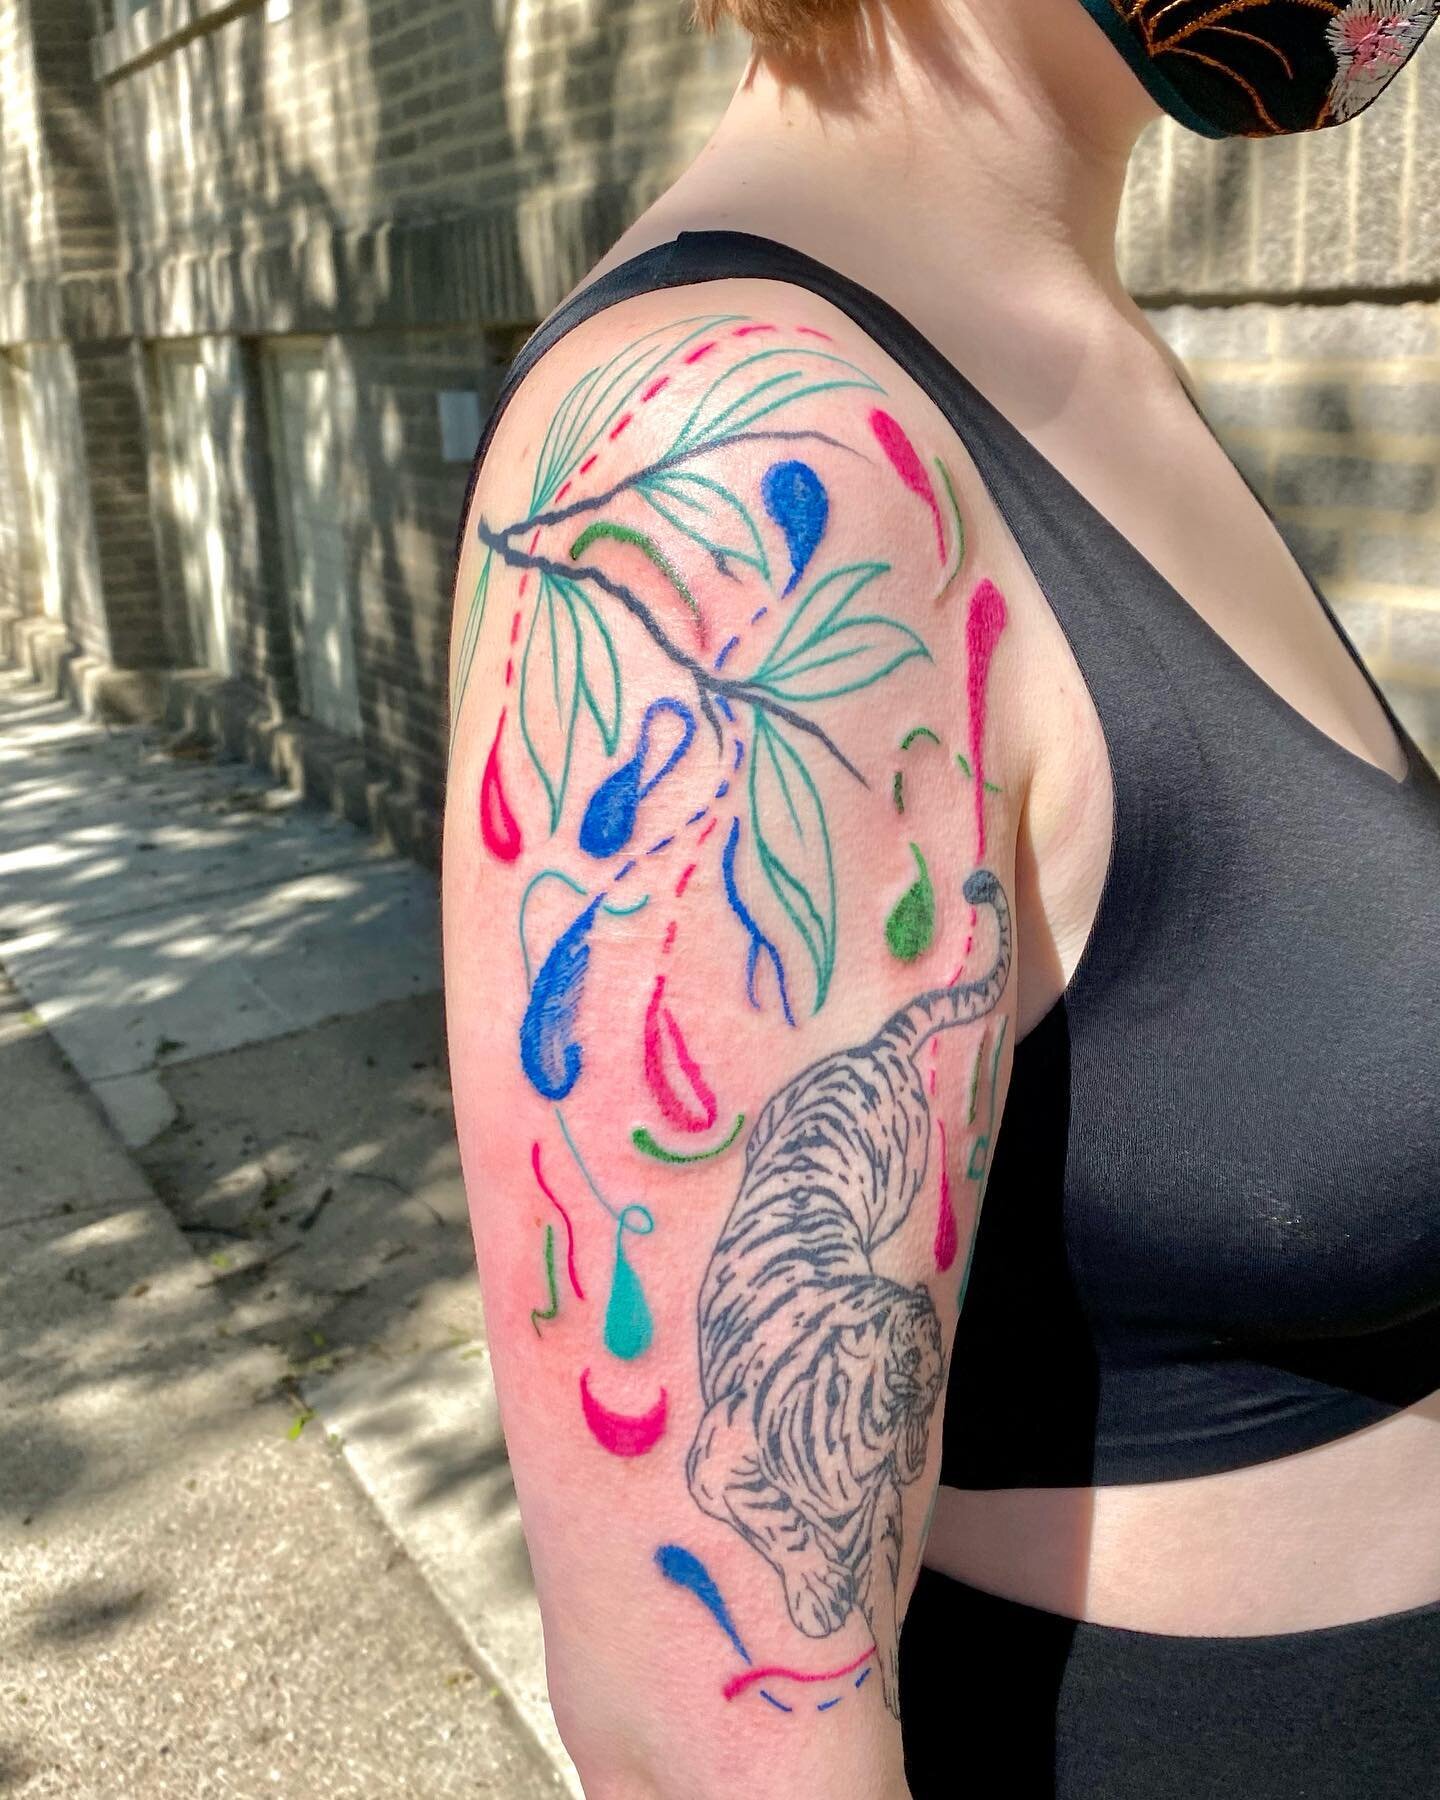 Drops and movements for Allie &mdash; a recent personal favorite, all drawn on ~ forest green a little angry on the skin still (branch/leaves and tiger not by me) 
~
~
~
~
#ttt #qttr #contemporarytattoo #tttism #dsrupttt #mainetattooartist #portland 